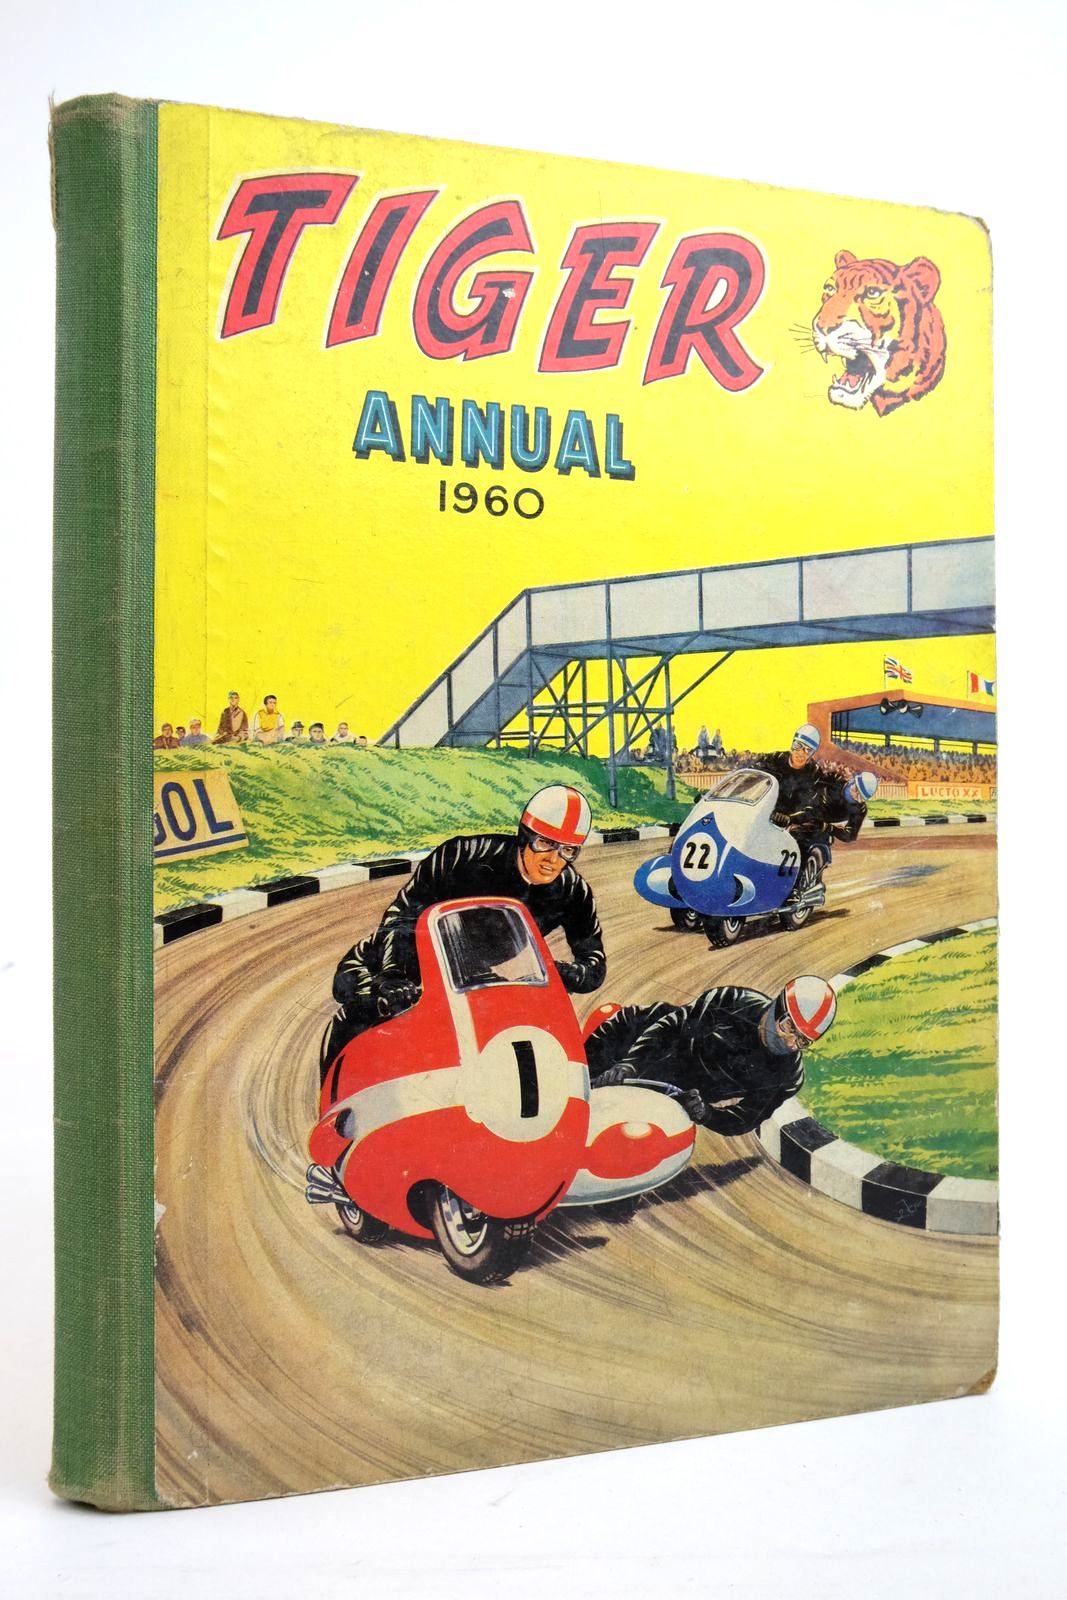 Photo of TIGER ANNUAL 1960 published by The Amalgamated Press (STOCK CODE: 2136177)  for sale by Stella & Rose's Books